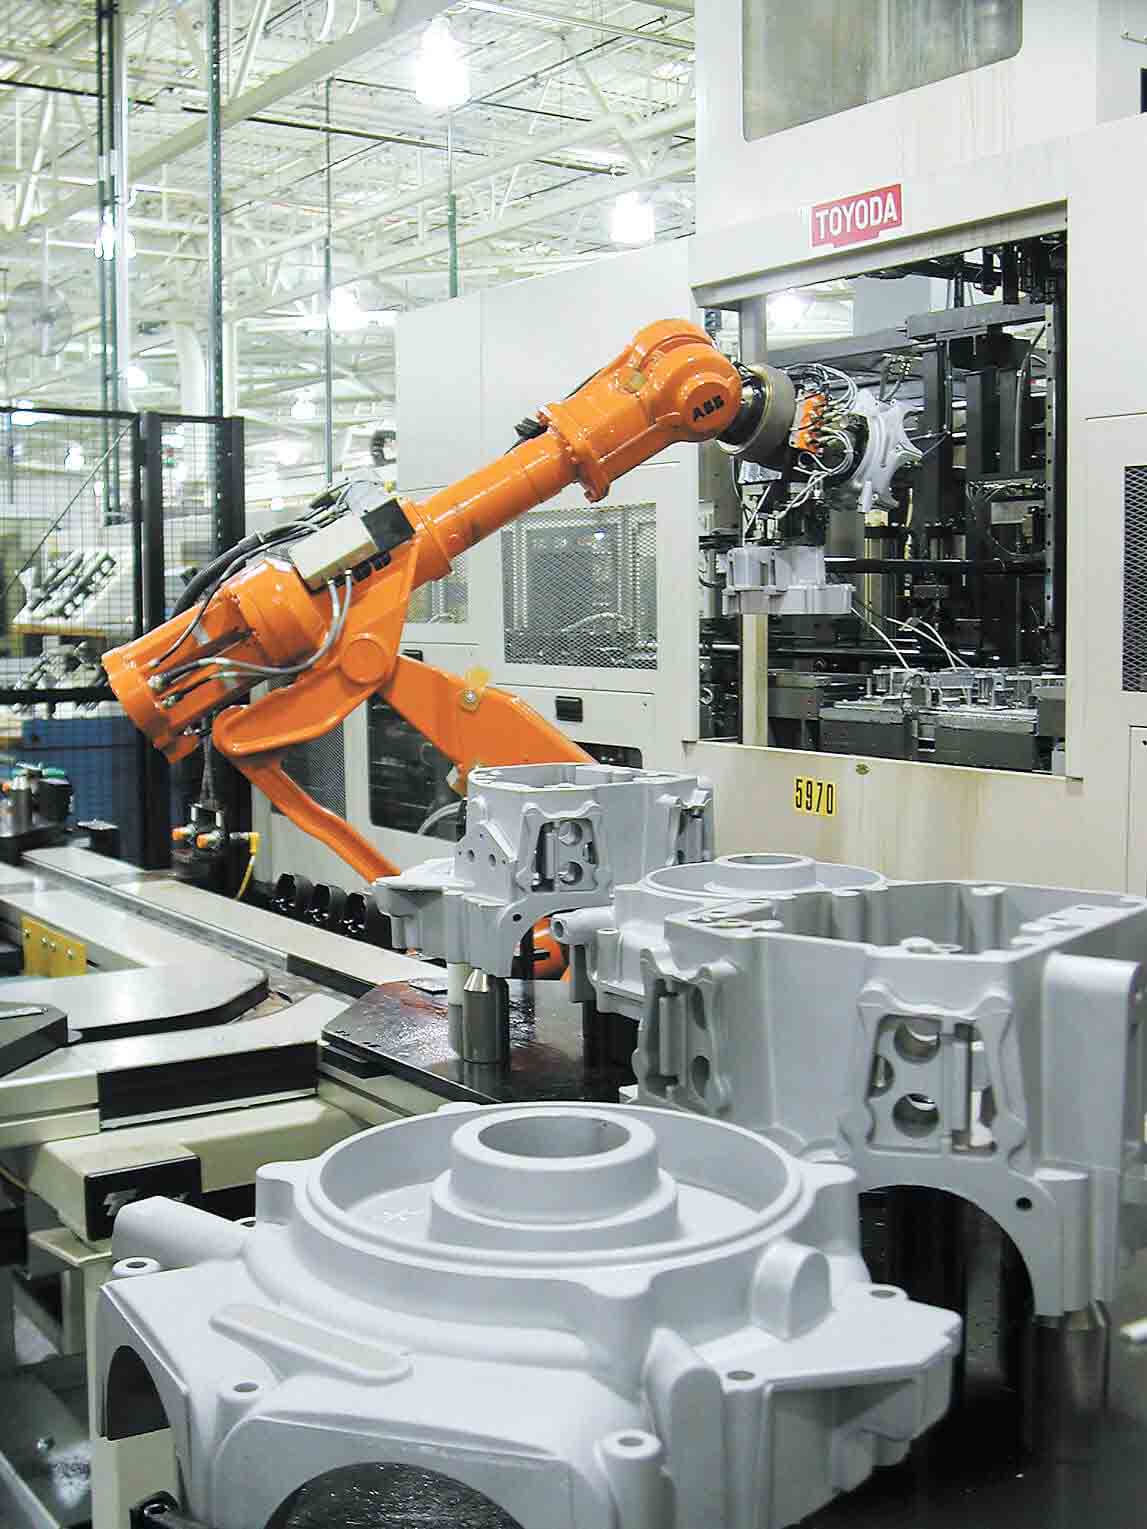 The main reasons for using robots in the industry are as follows